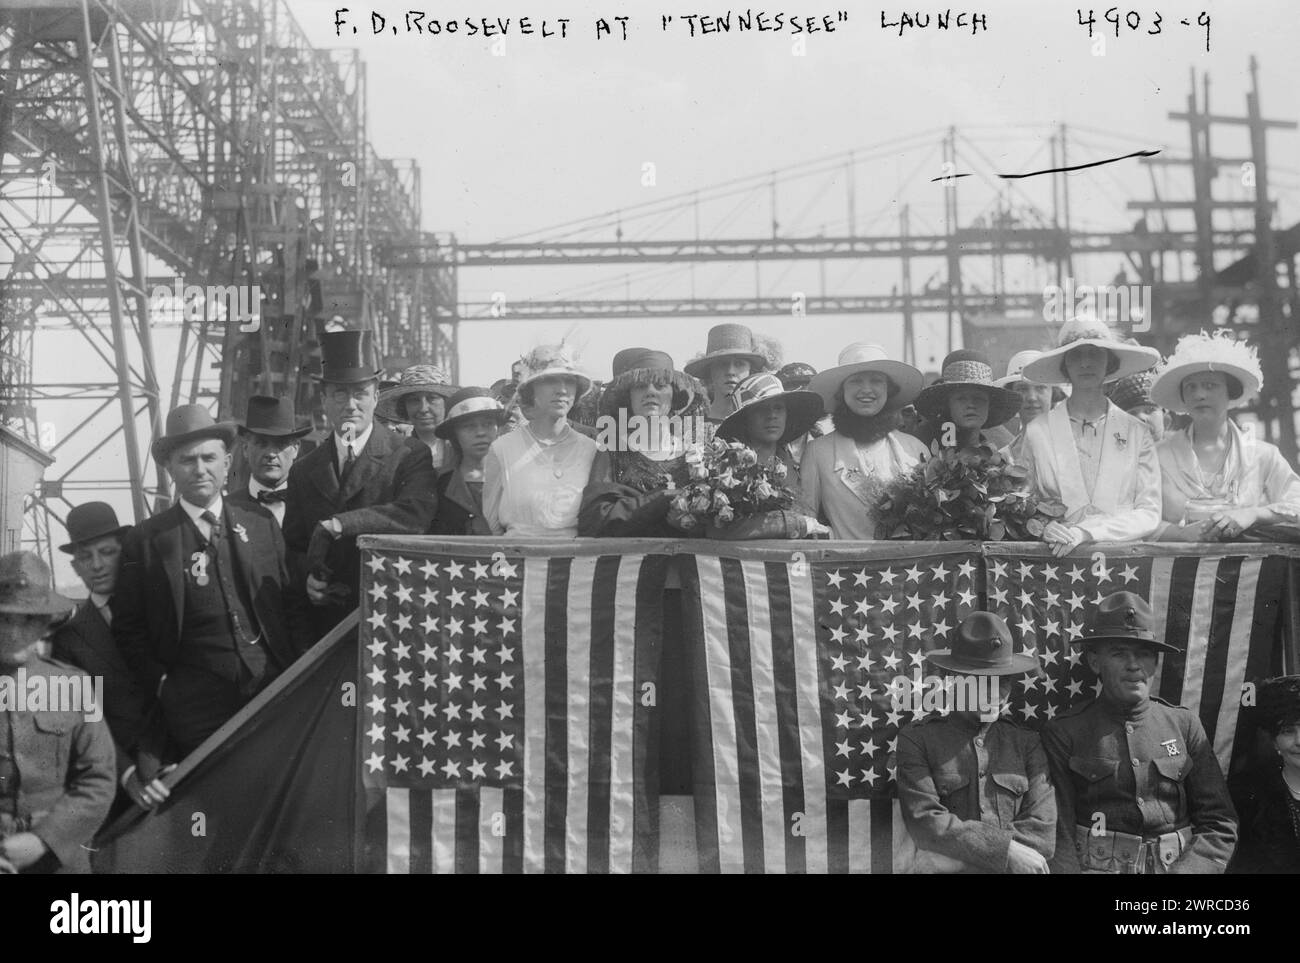 F.D. Roosevelt at 'Tennesee' launch, Photograph shows Assistant Secretary of the Navy, Franklin Delano Roosevelt (1882-1945) (left, wearing top hat) at the launching of the U.S.S. Tennessee at the Brooklyn Navy Yard, April 30, 1919. Also shown are Helen Lenore Roberts (center, white hat, holding bouquet) and her father Tennessee Governor A.H.Roberts (standing to left of Roosevelt)., 1919 April 30, Glass negatives, 1 negative: glass Stock Photo